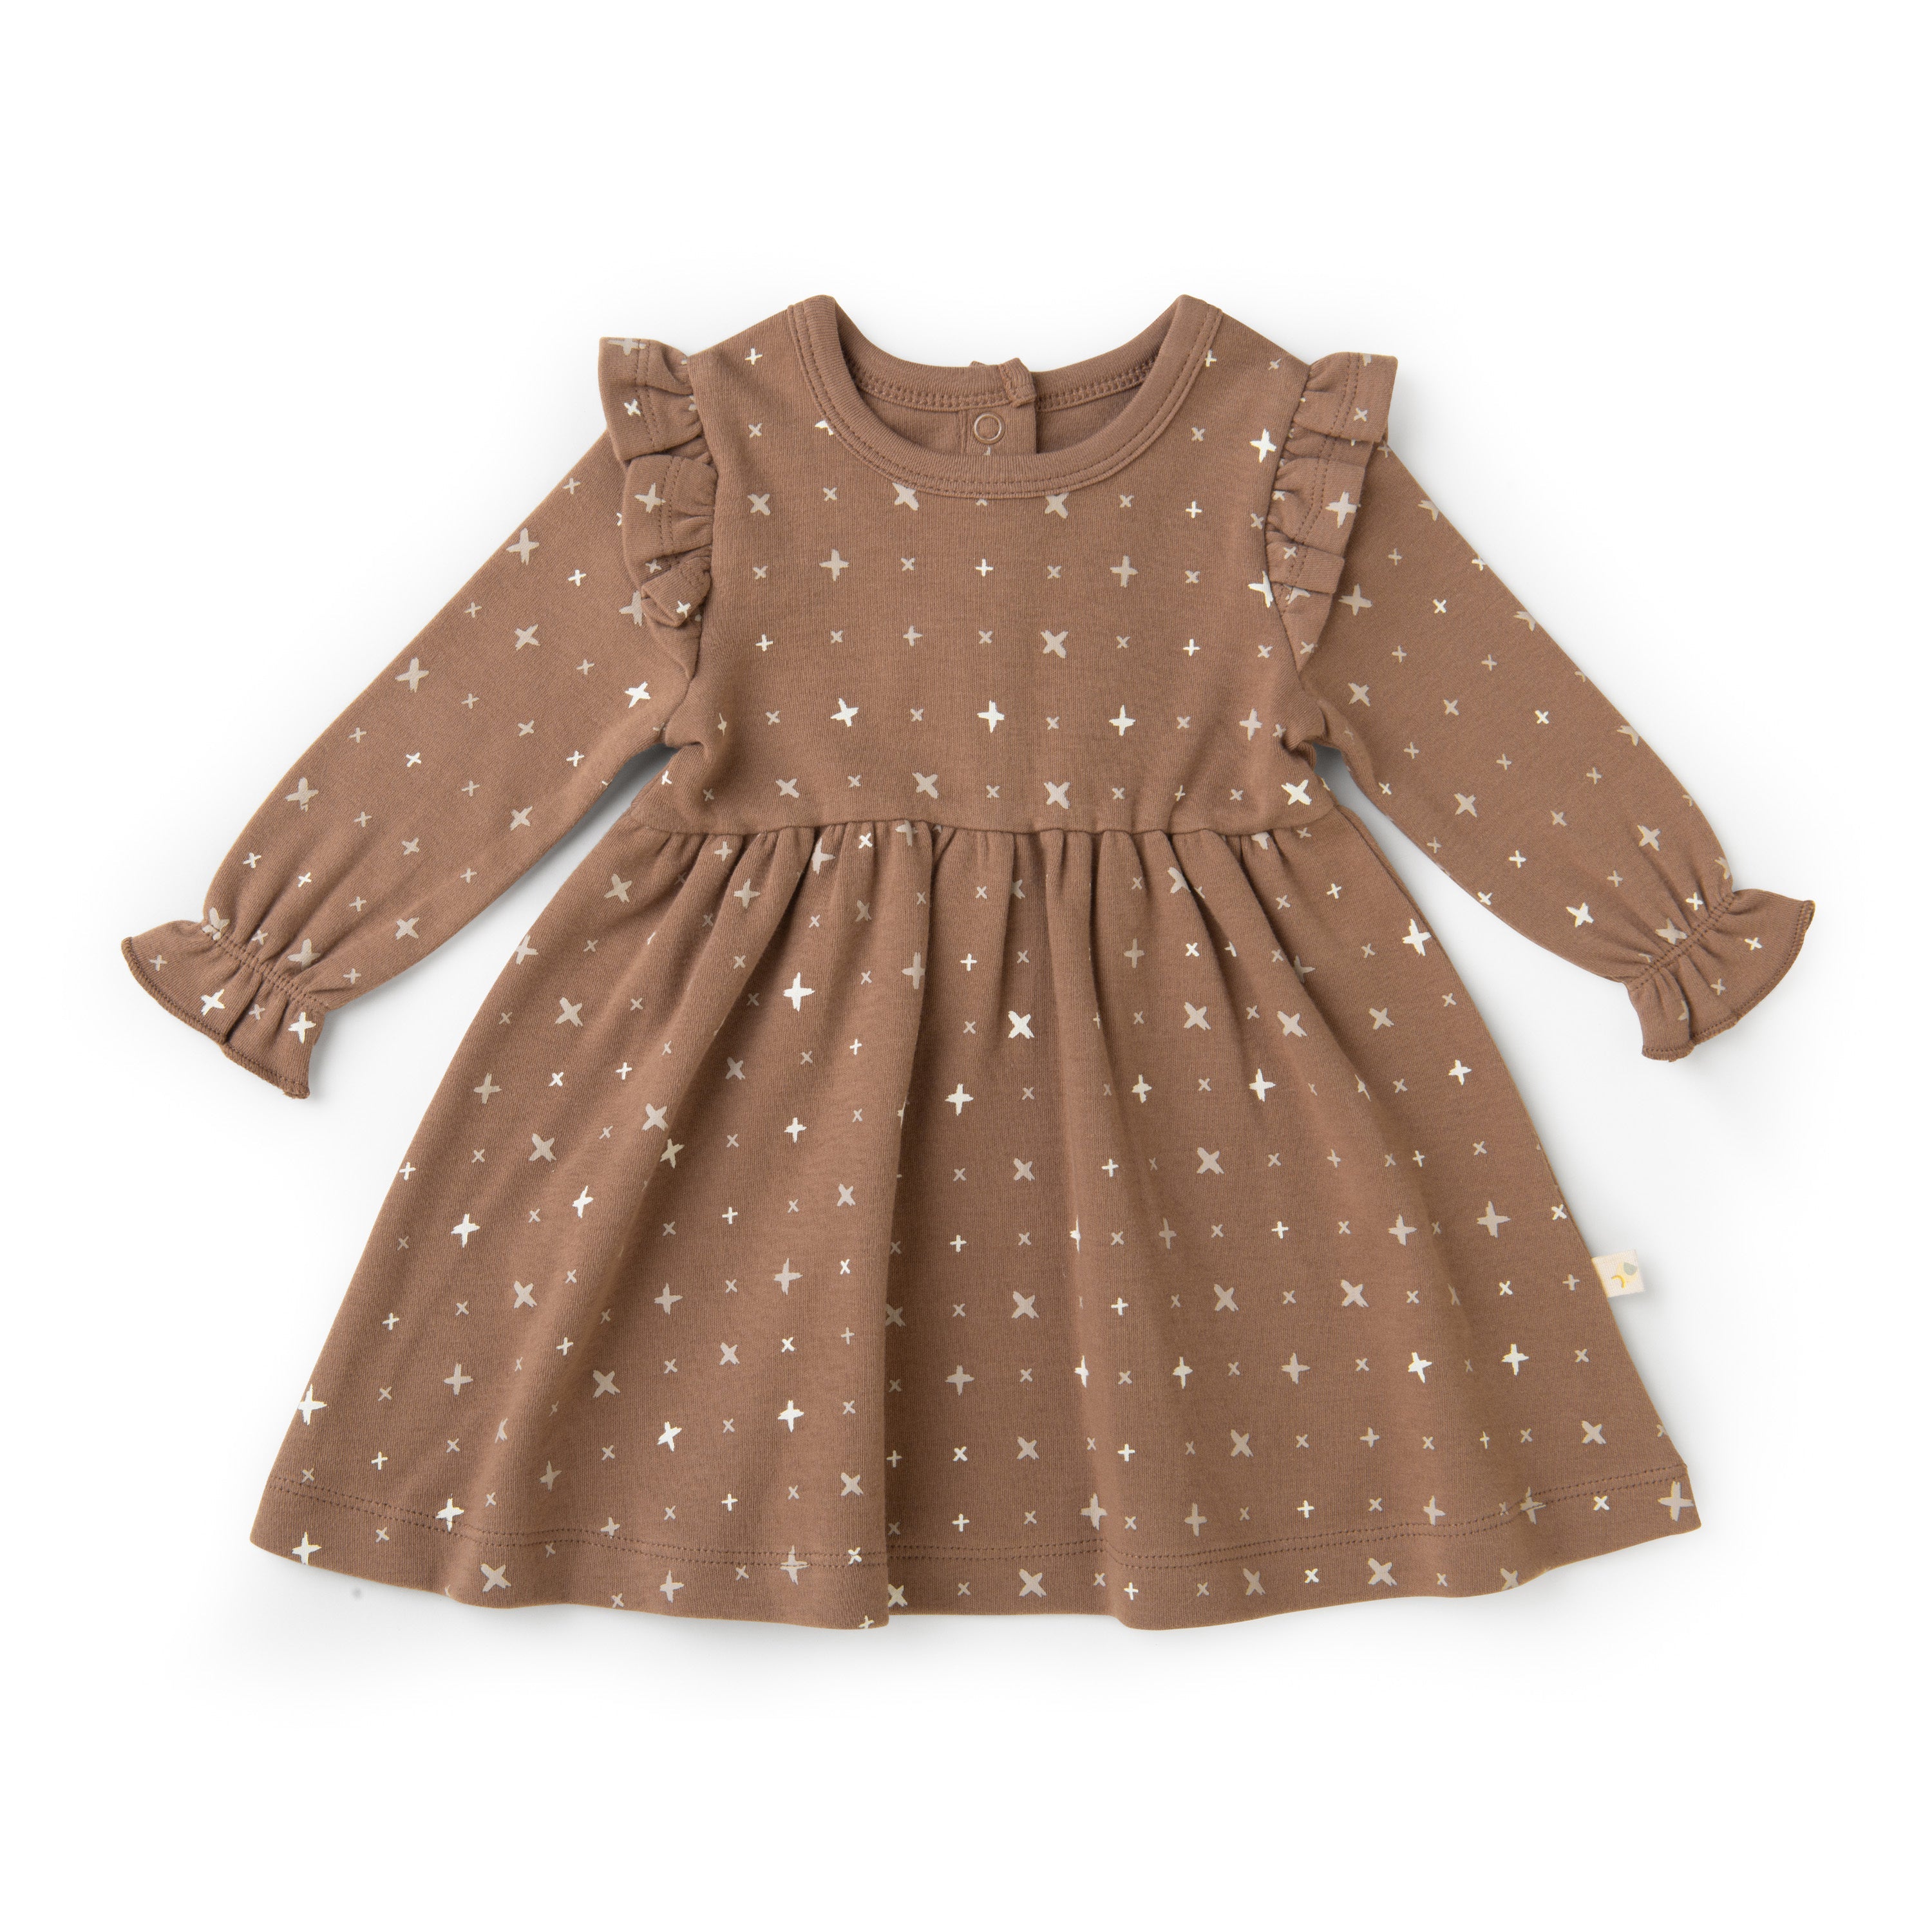 An Organic Ruffle Dress - Sparkle from Organic Girls with white cross patterns, featuring frilled shoulder details and long sleeves, displayed on a white background.